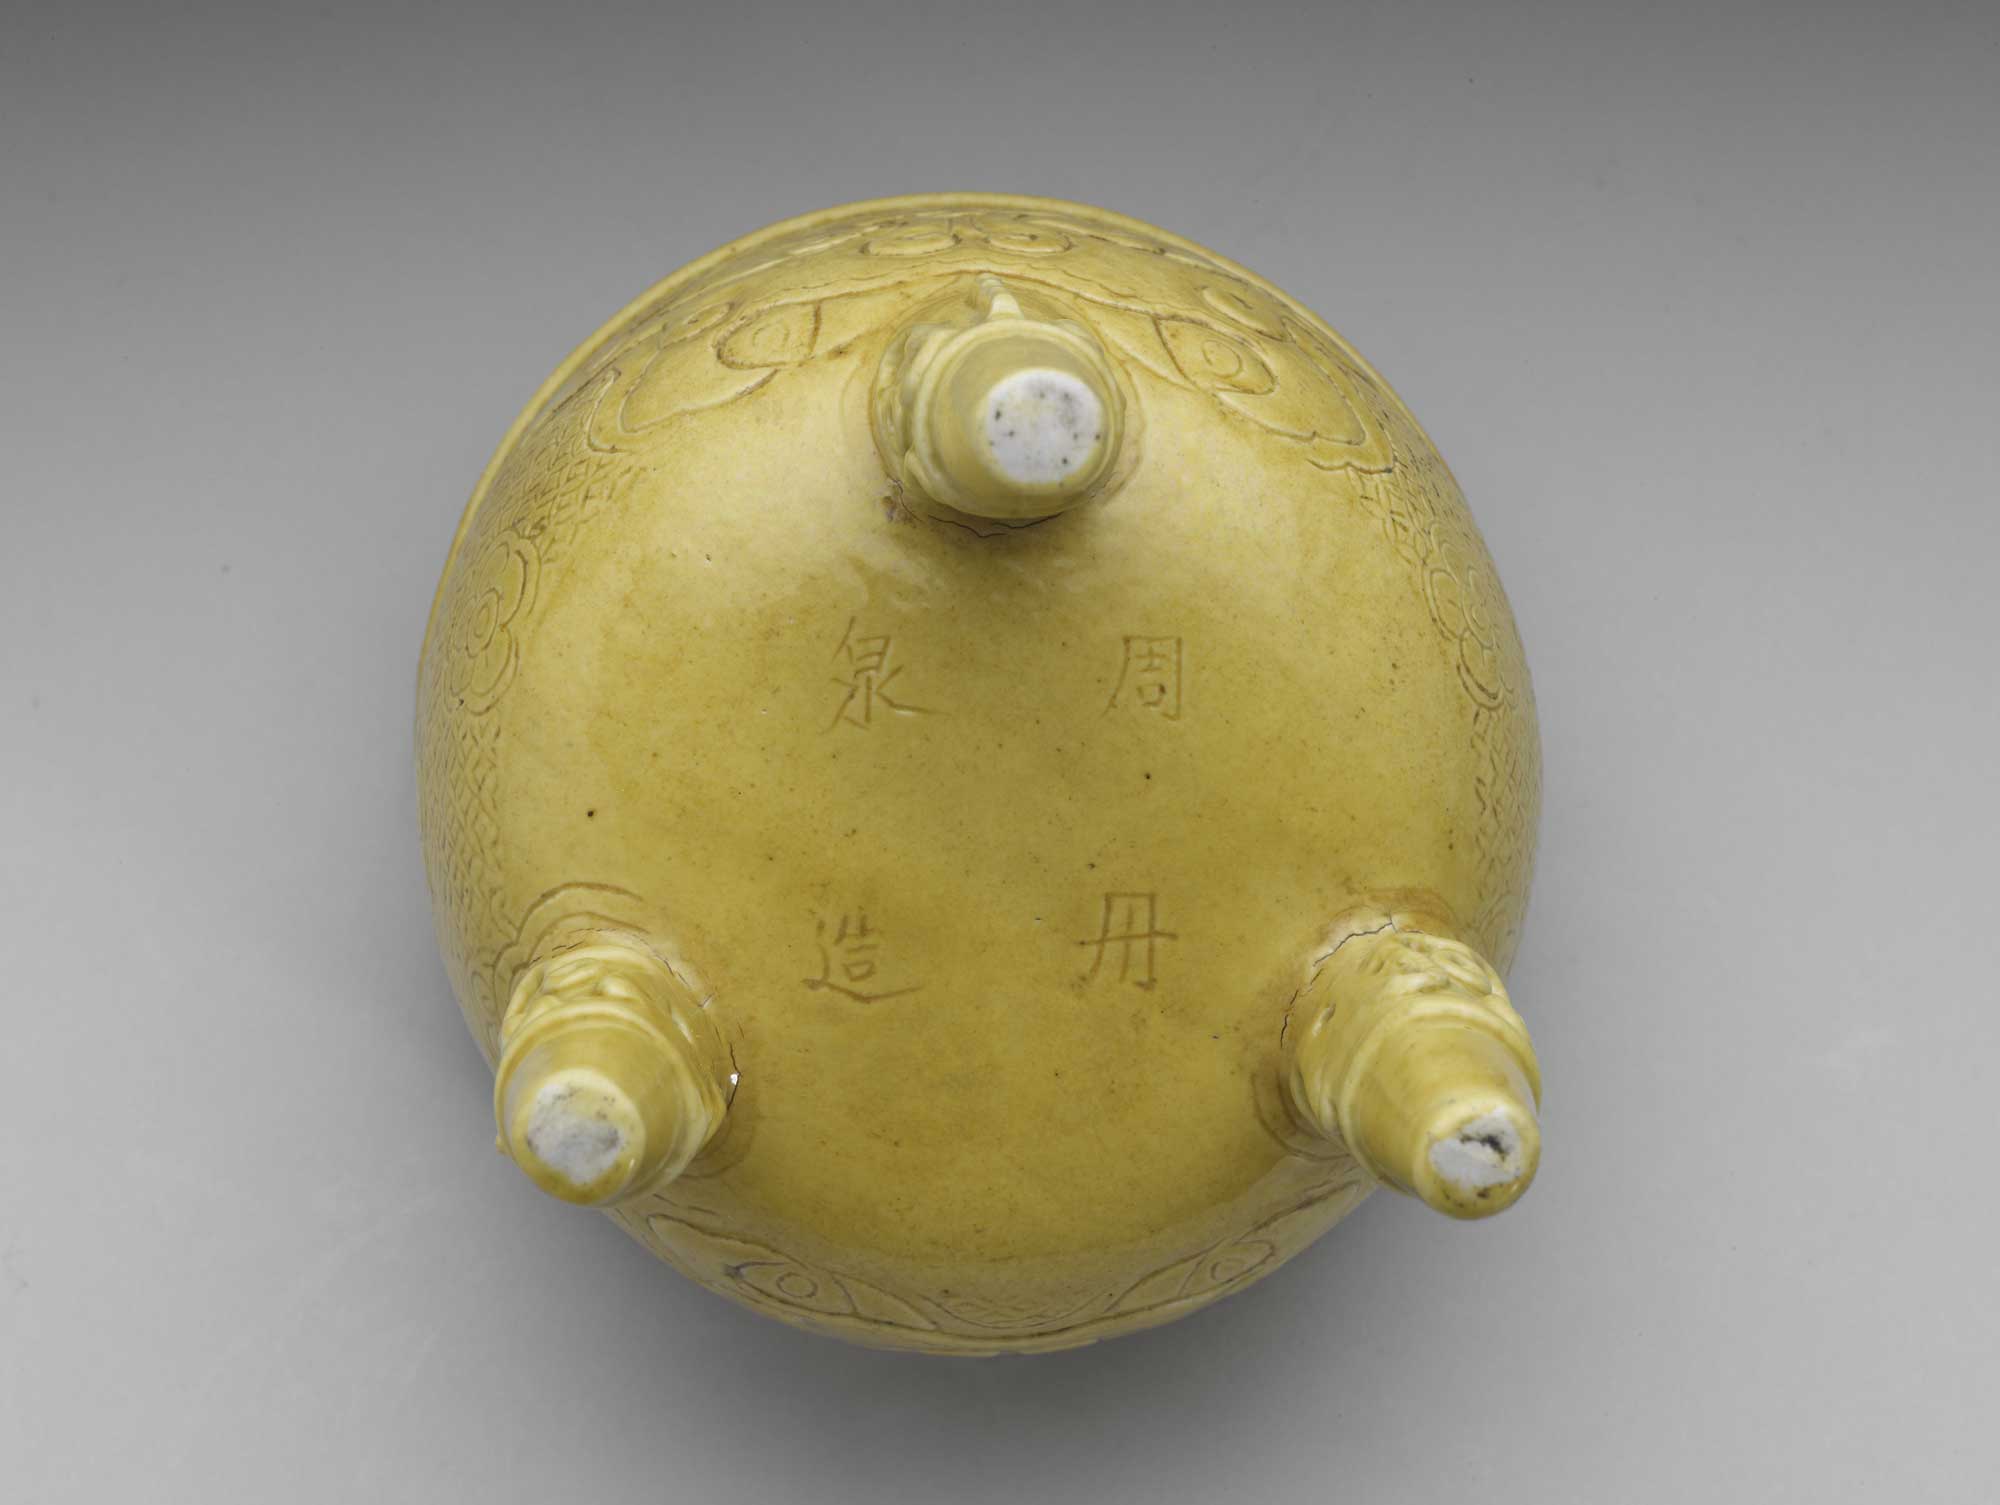 Porcelain Tripod with Animal-mask Design and Arch Handles in Yellow glaze